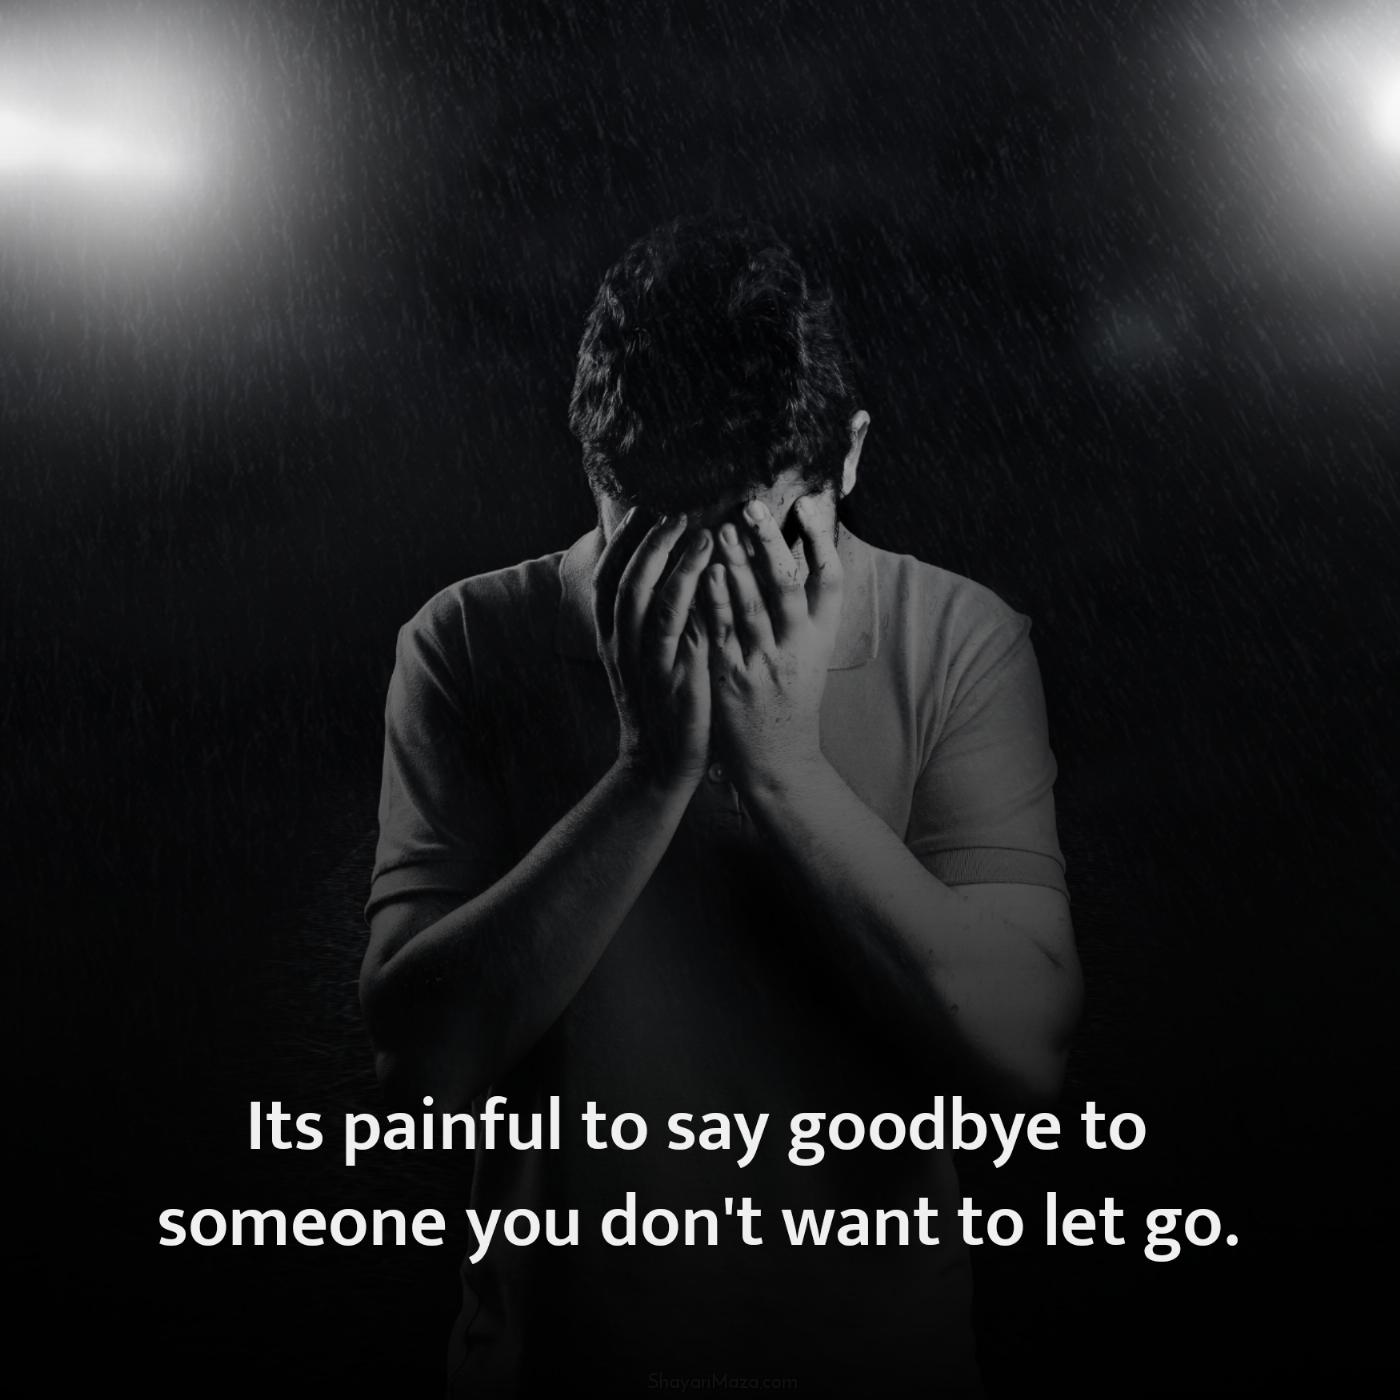 Its painful to say goodbye to someone you don't want to let go